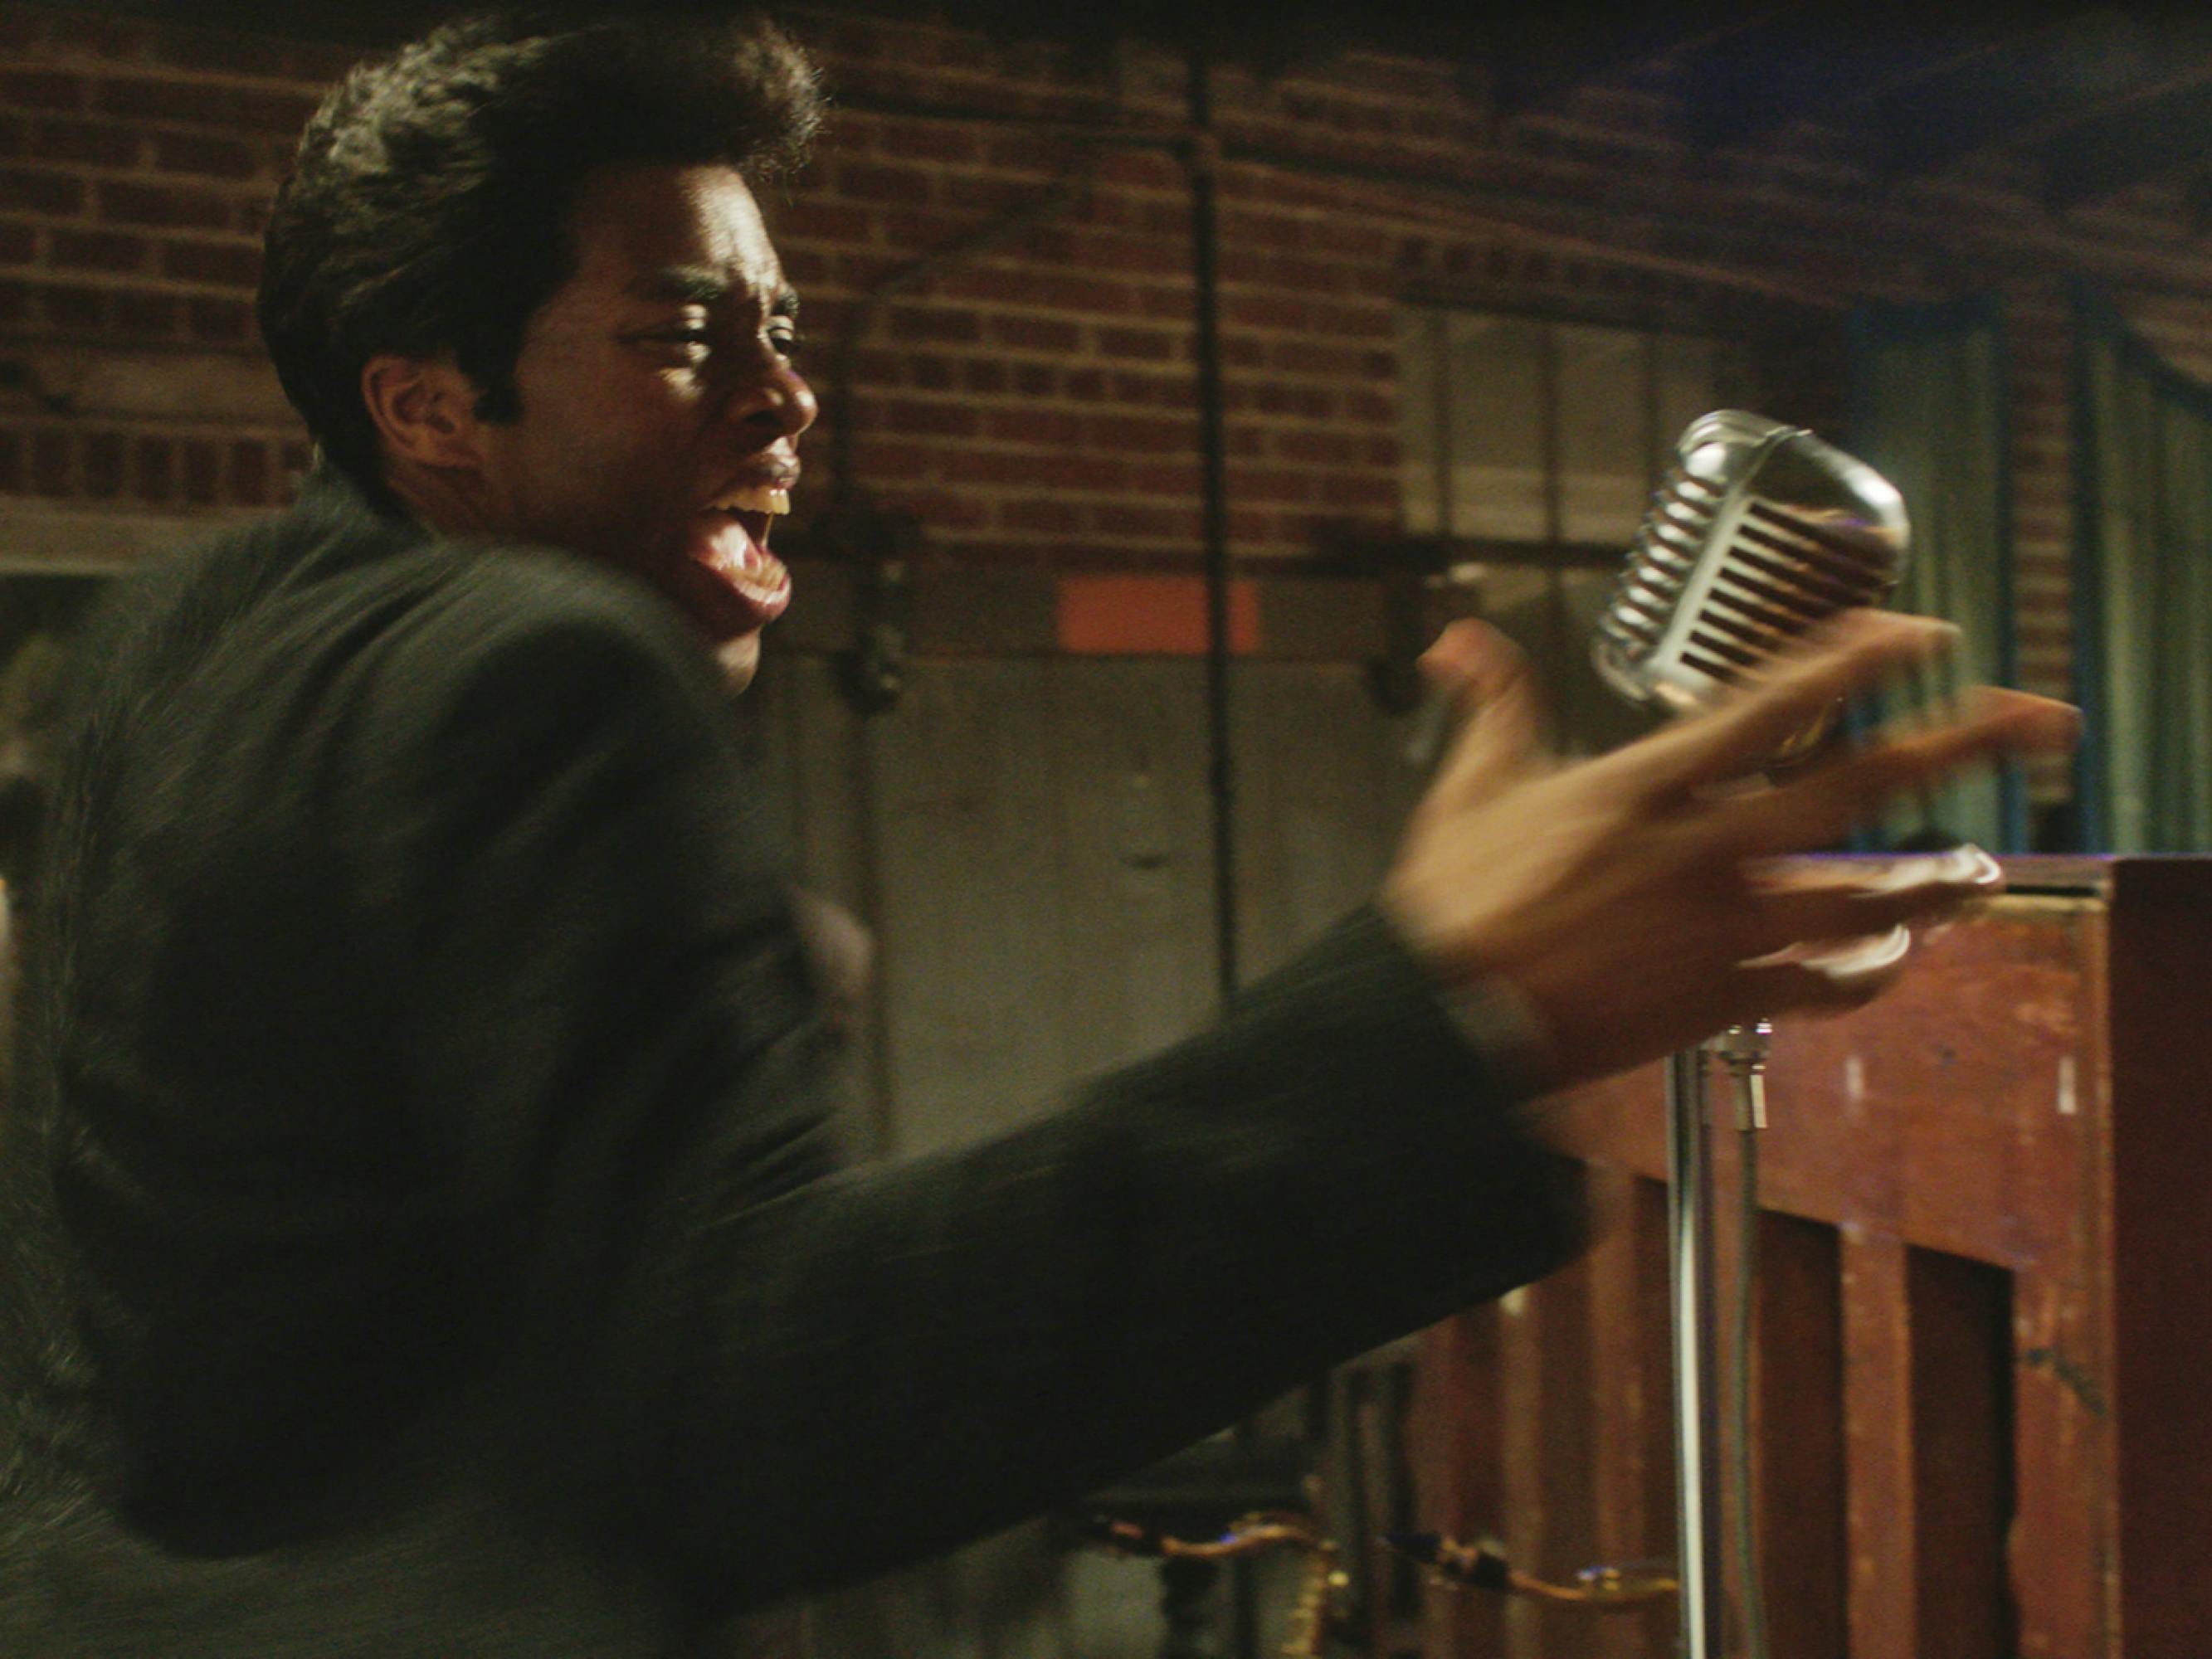 Boseman as James Brown. He wears a black suit and his hair in Brown’s signature conk pompadour. His mouth is open wide, and he reaches for the microphone. Despite the dynamism of the shot, he appears to be in a practice space with brick walls, and other musical equipment strewn about. 